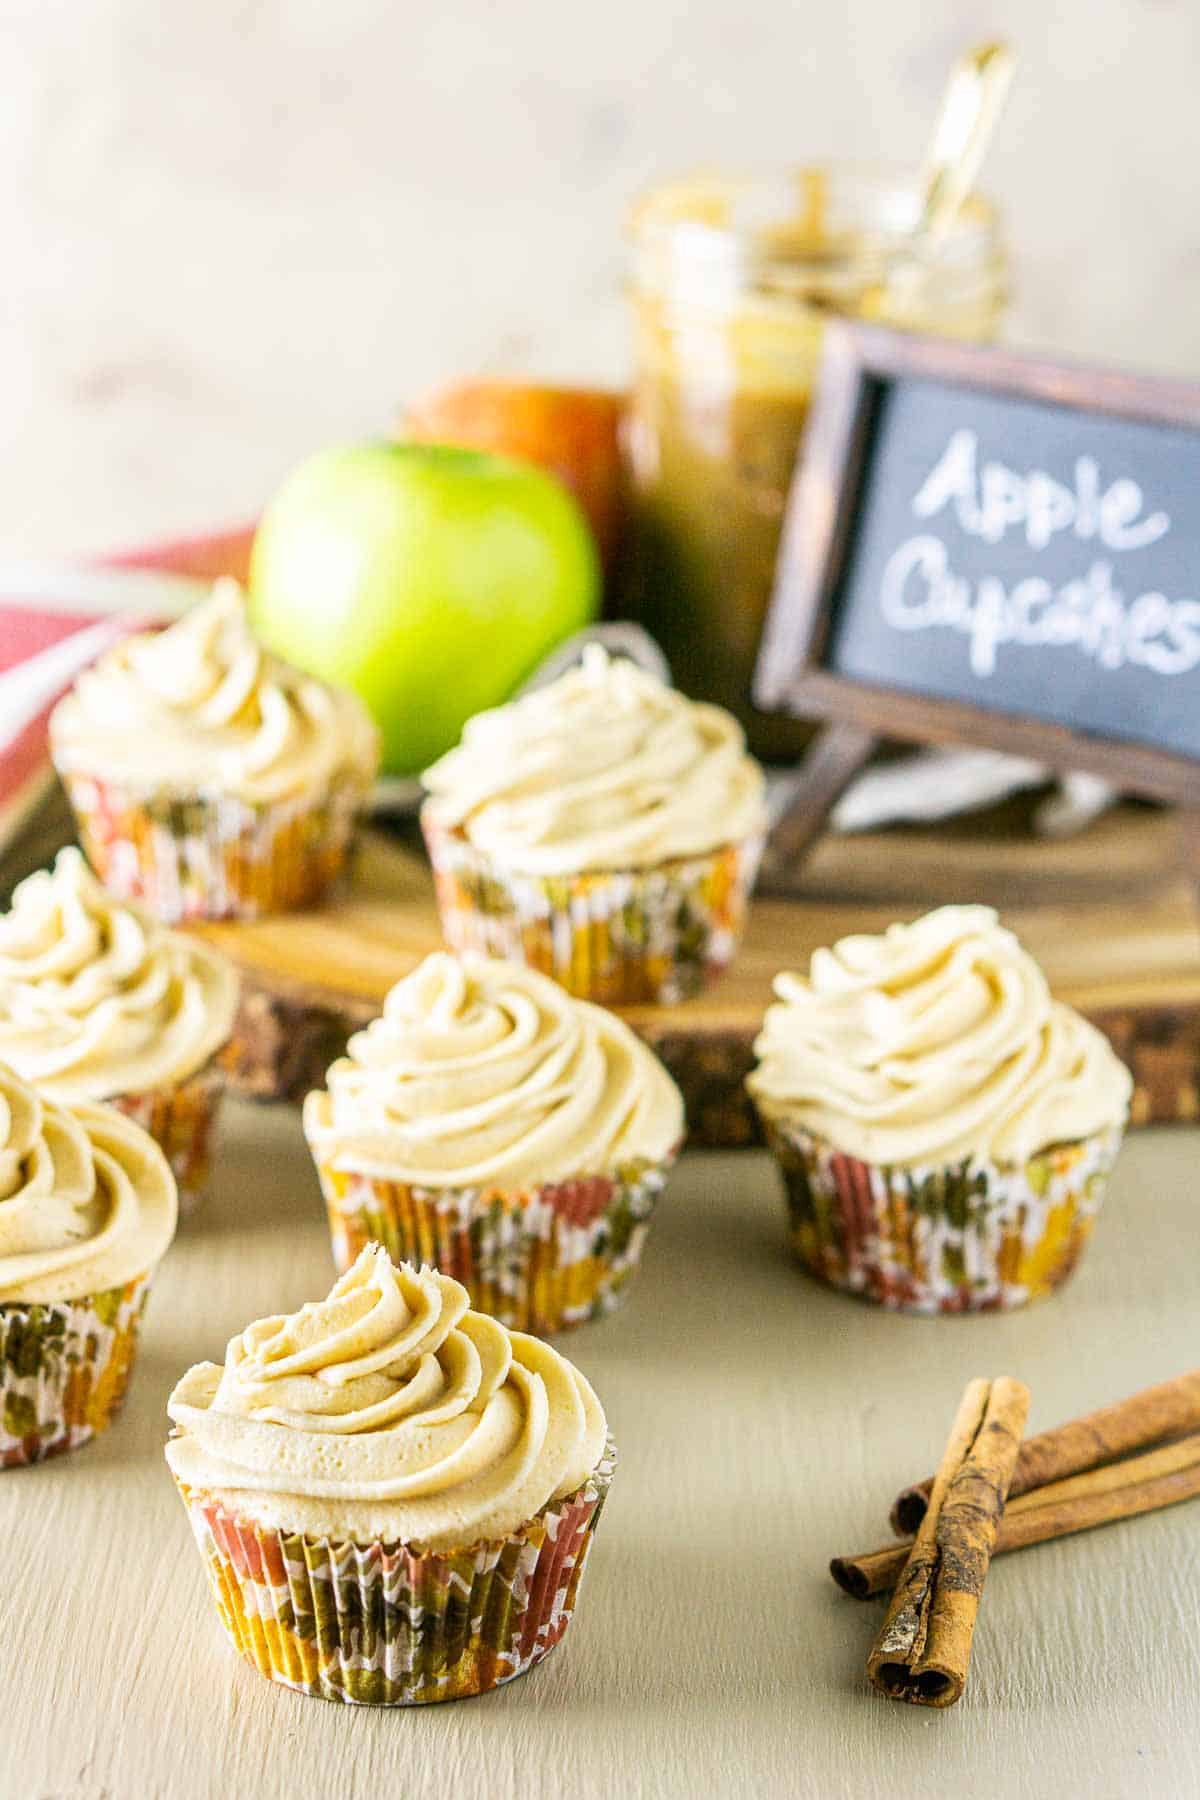 The apple spice cupcakes on a cream-colored surface with cinnamon sticks to the side and two apples in the background.